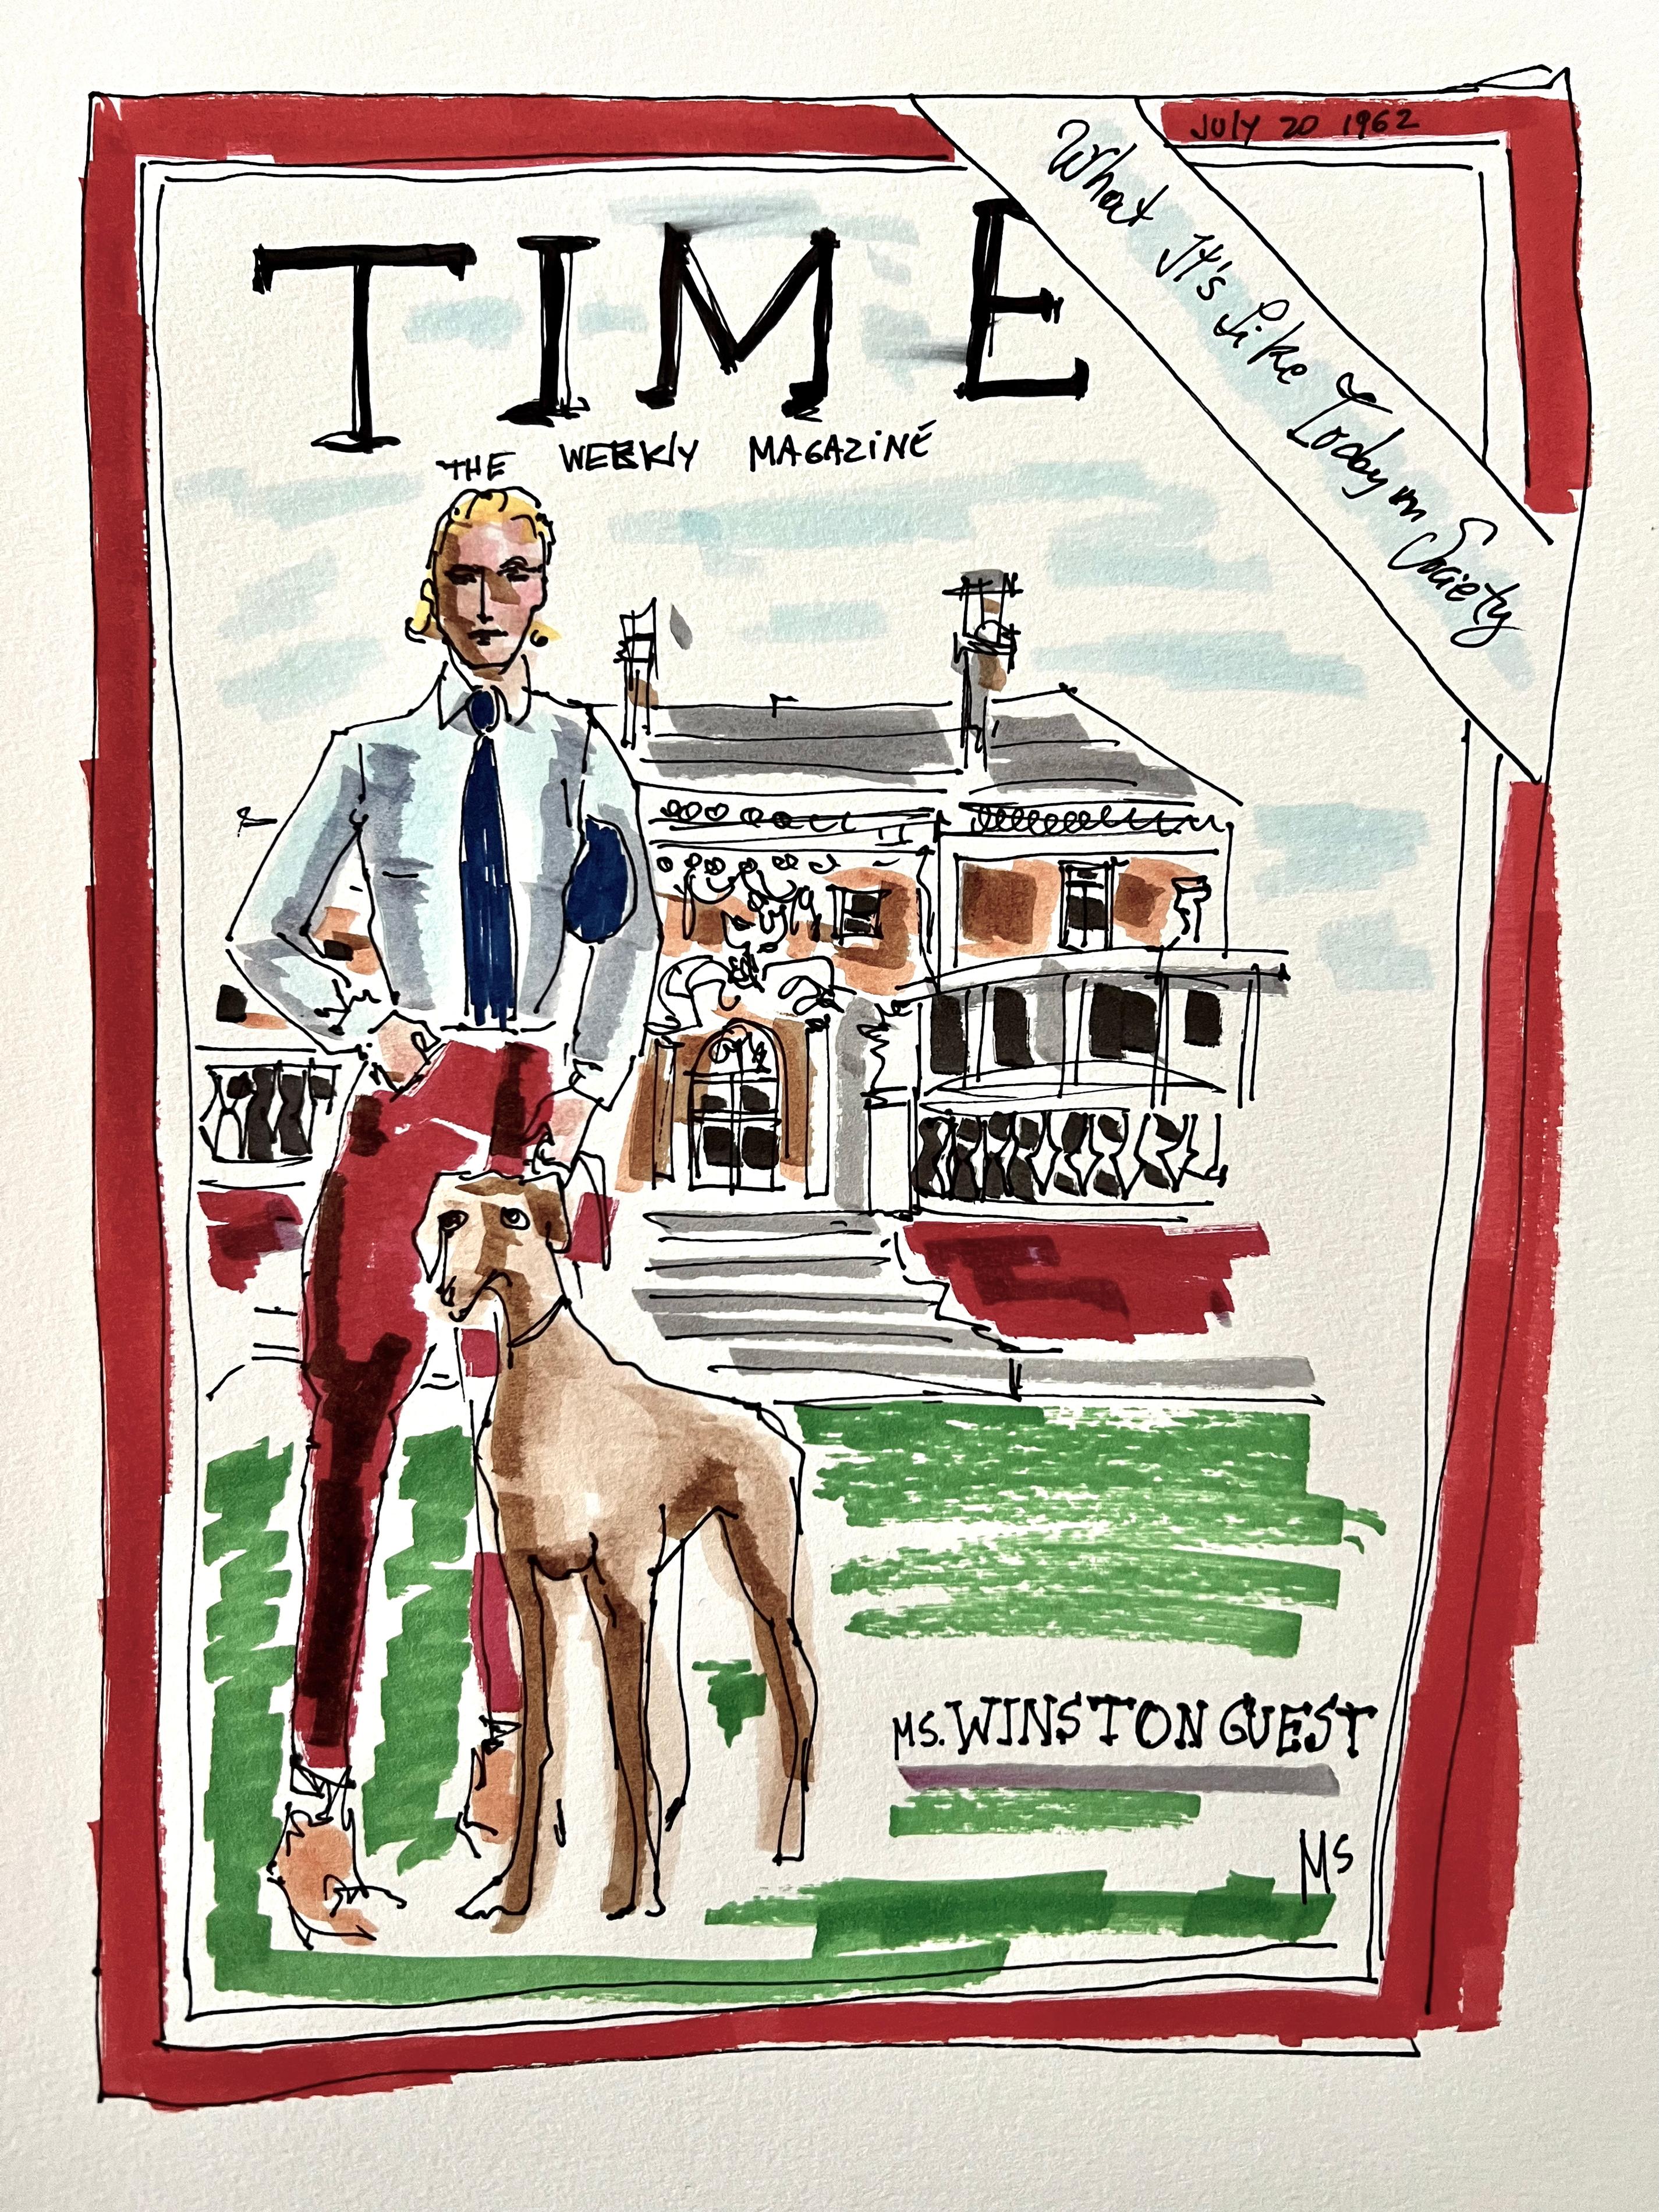 Manuel Santelices Figurative Painting - C.Z Guest Time cover. From the Fashion series